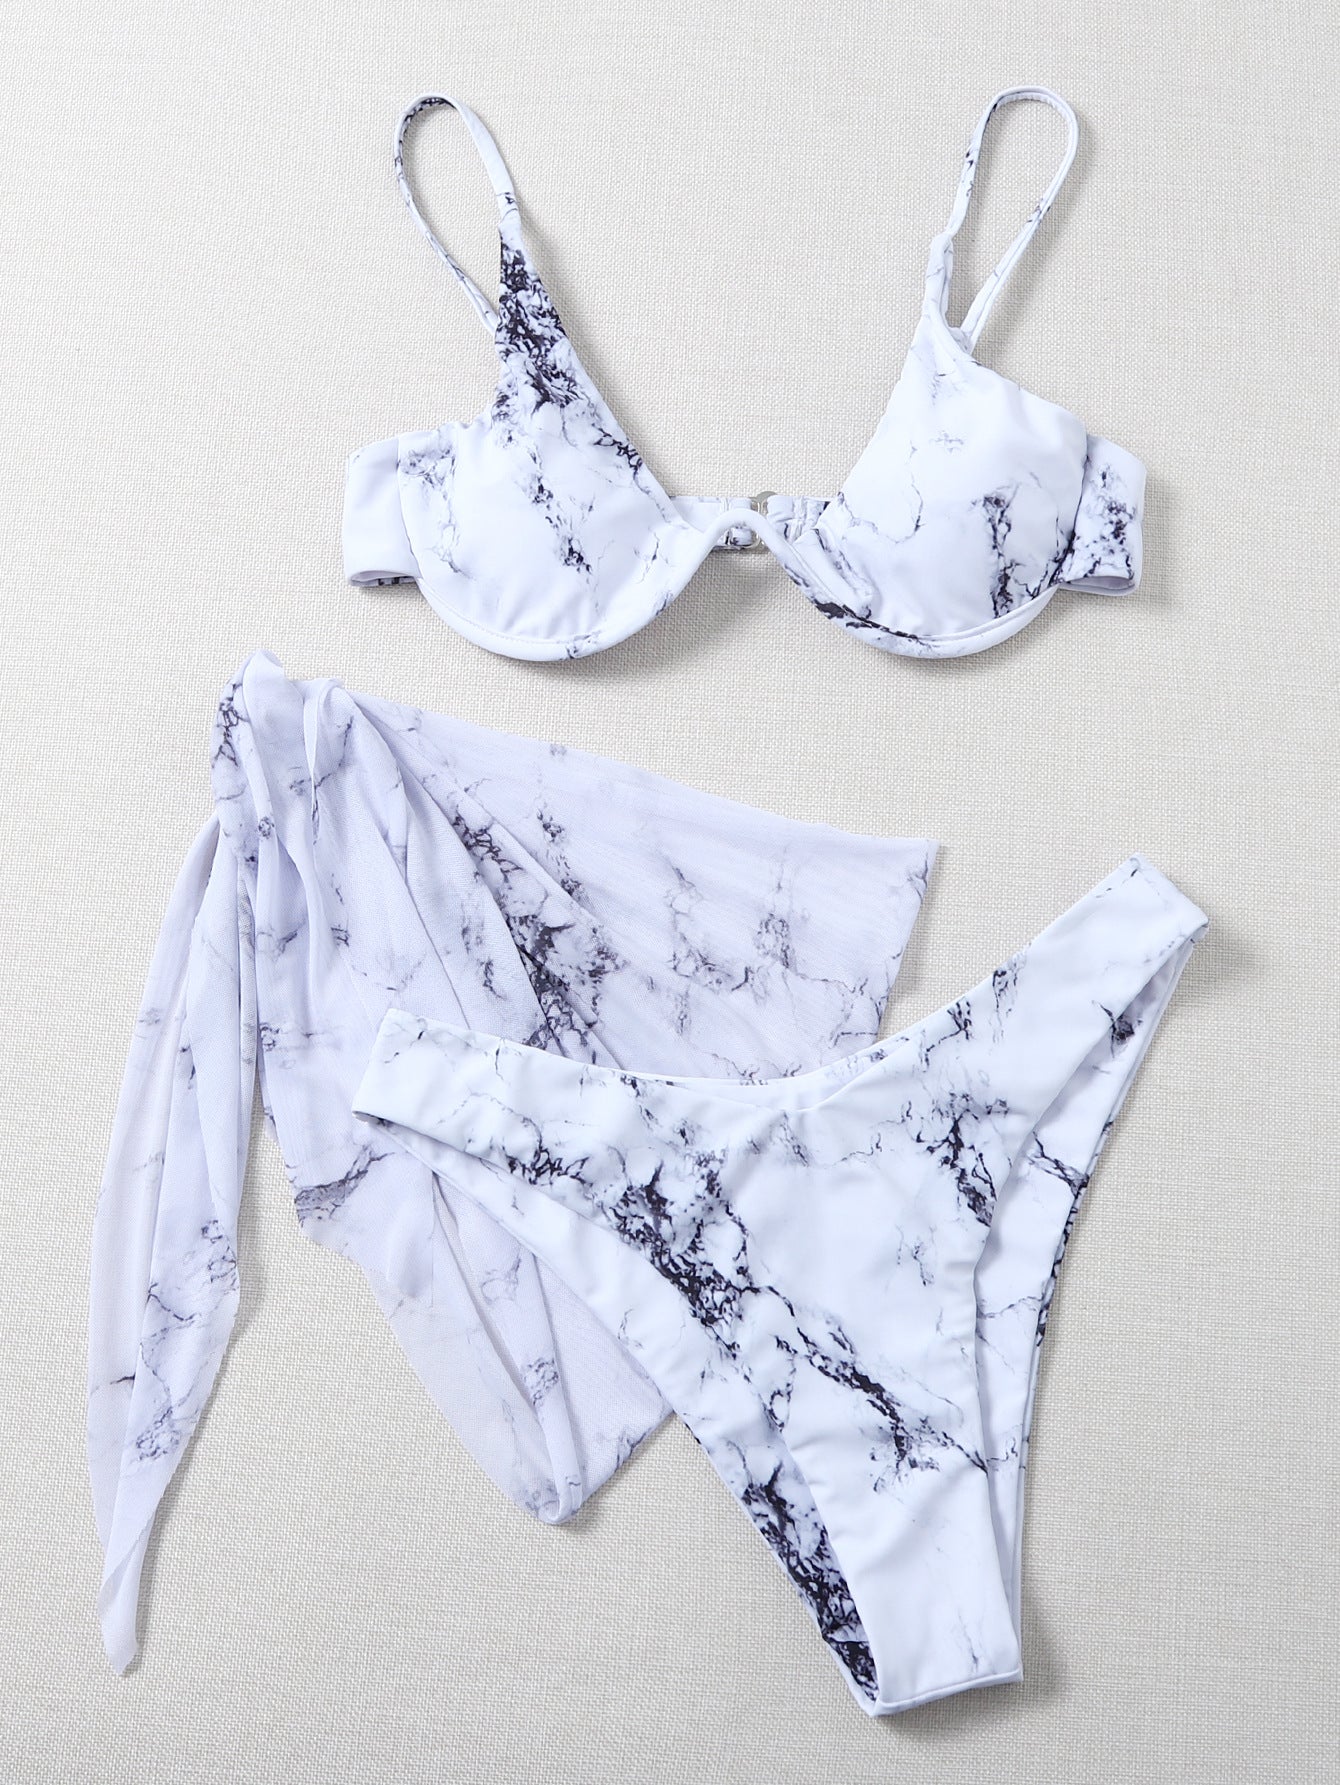 Marble Print Swimsuit: A swimwear piece featuring a stylish marble pattern, adding a unique and fashionable touch to your beach or poolside look.